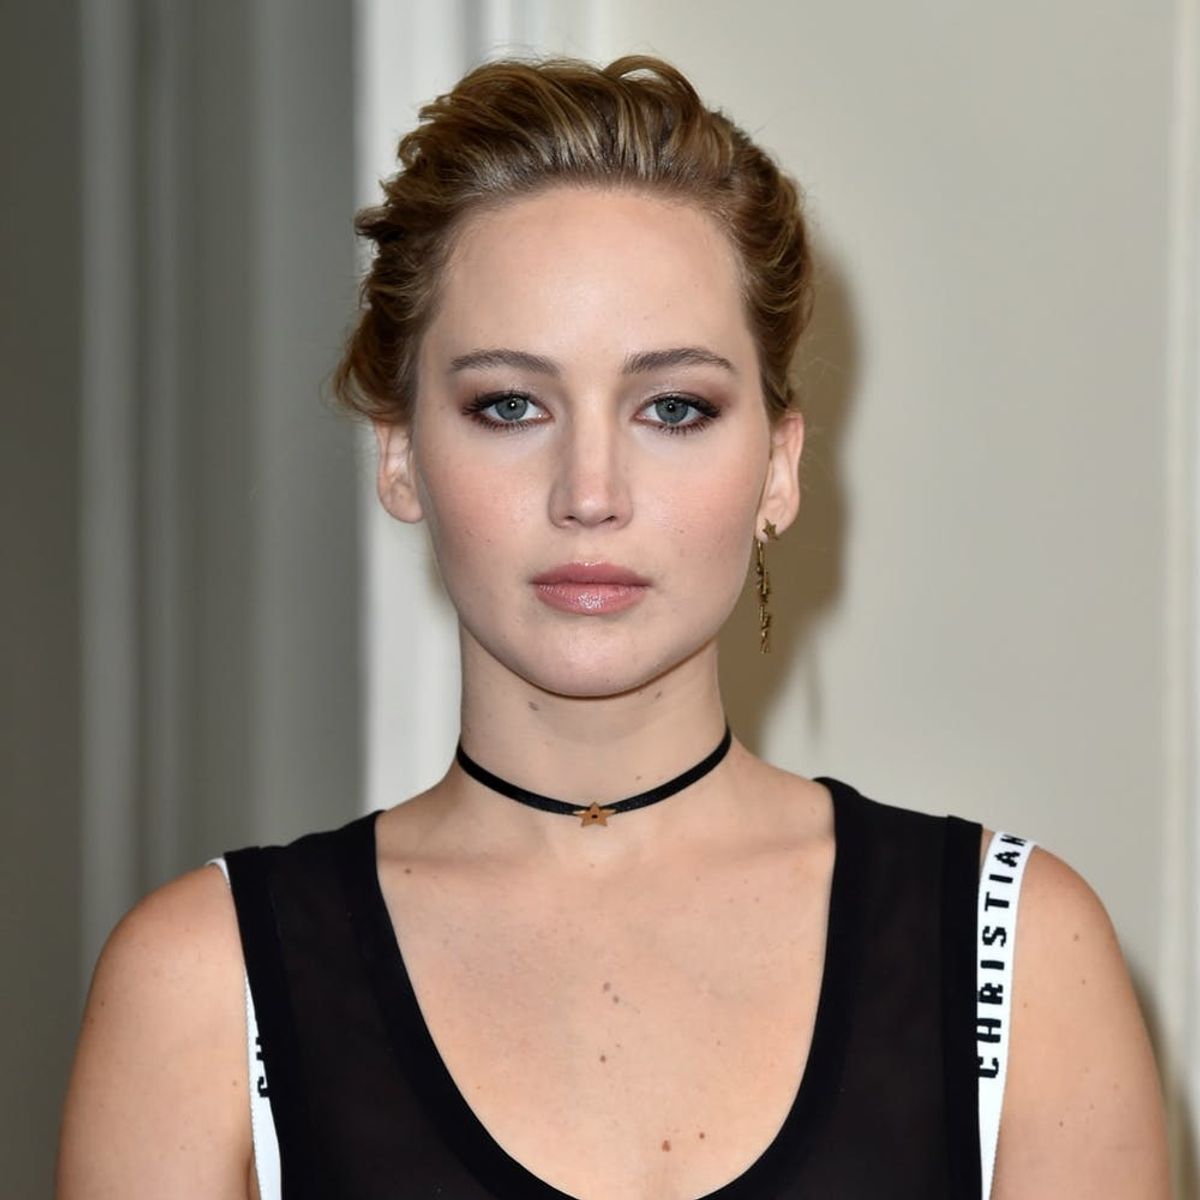 Jennifer Lawrence Just Signed Up to Play This Iconic Historical Figure